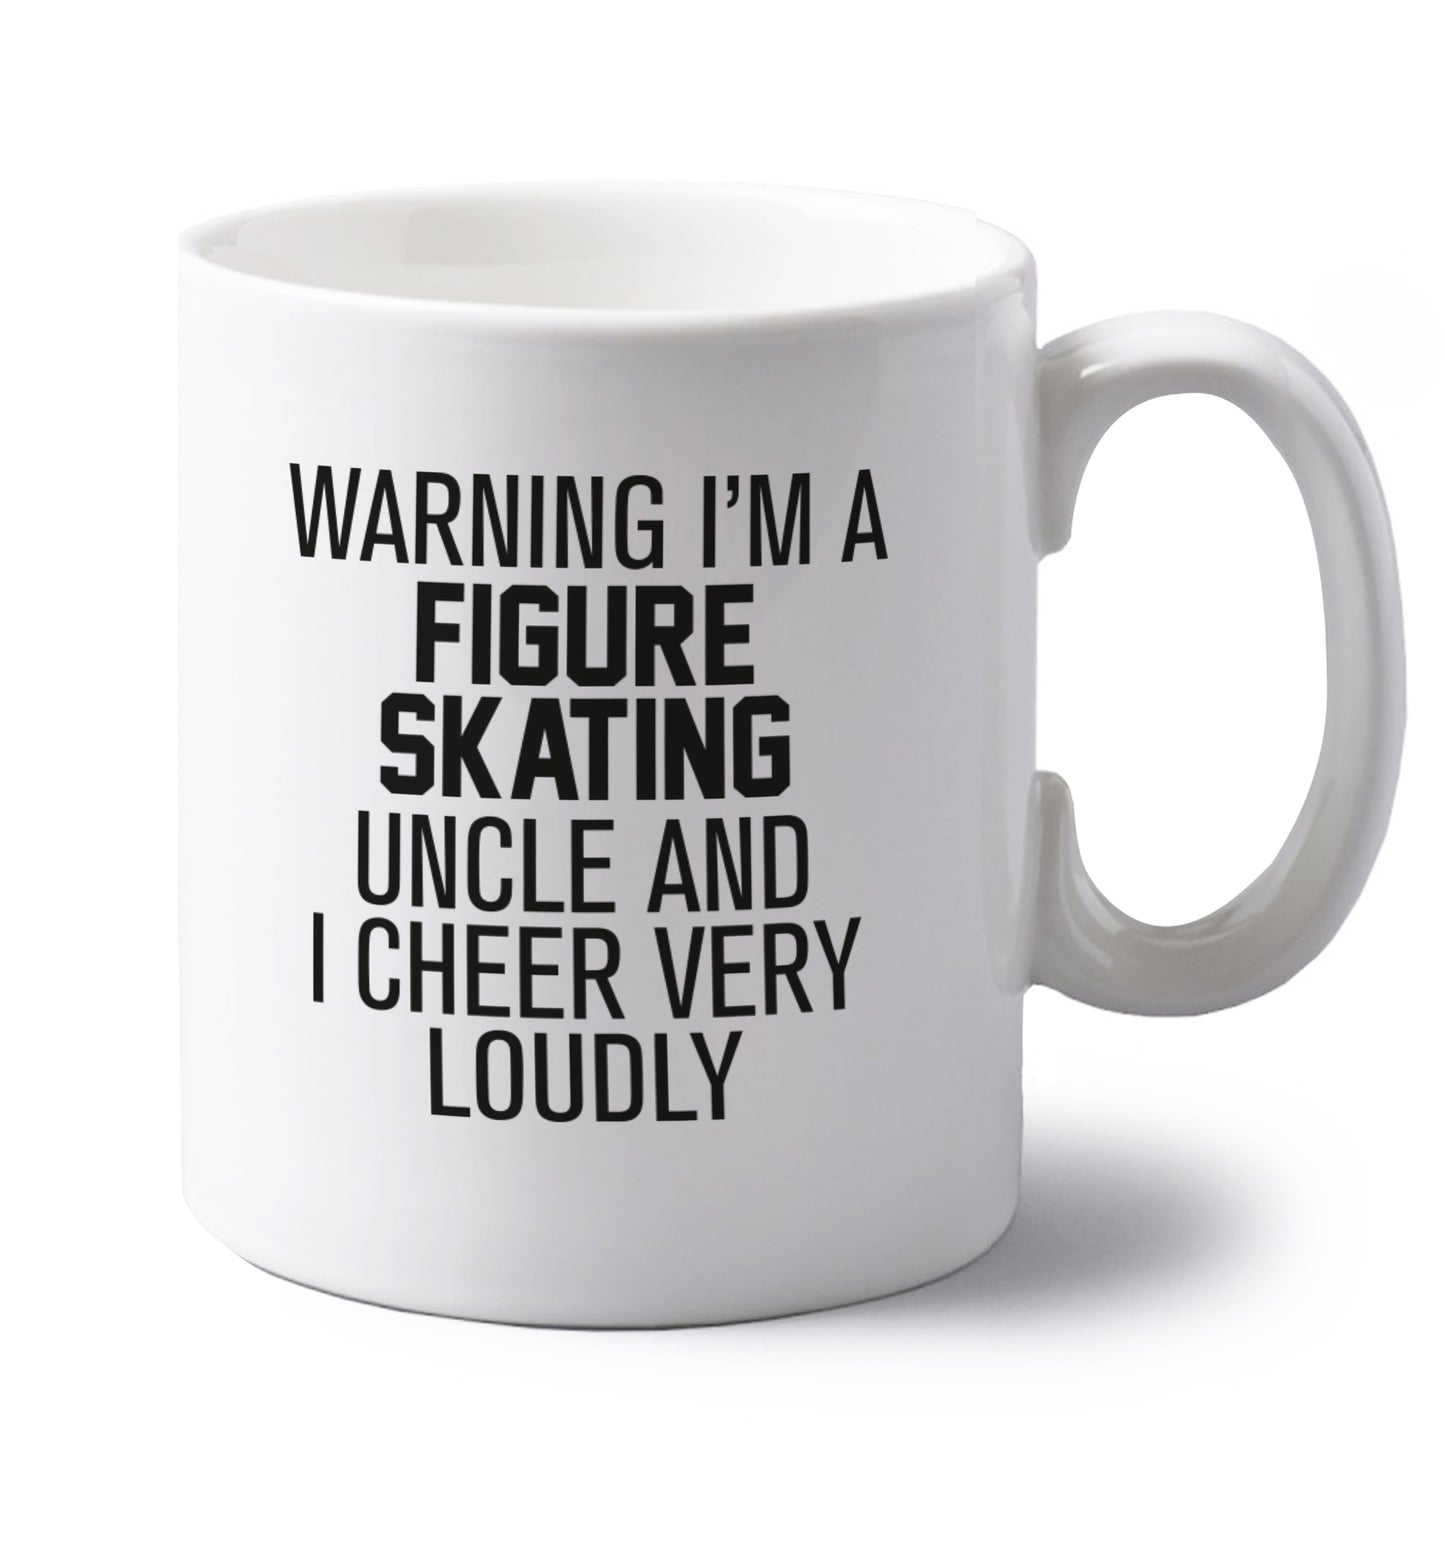 Warning I'm a figure skating uncle and I cheer very loudly left handed white ceramic mug 